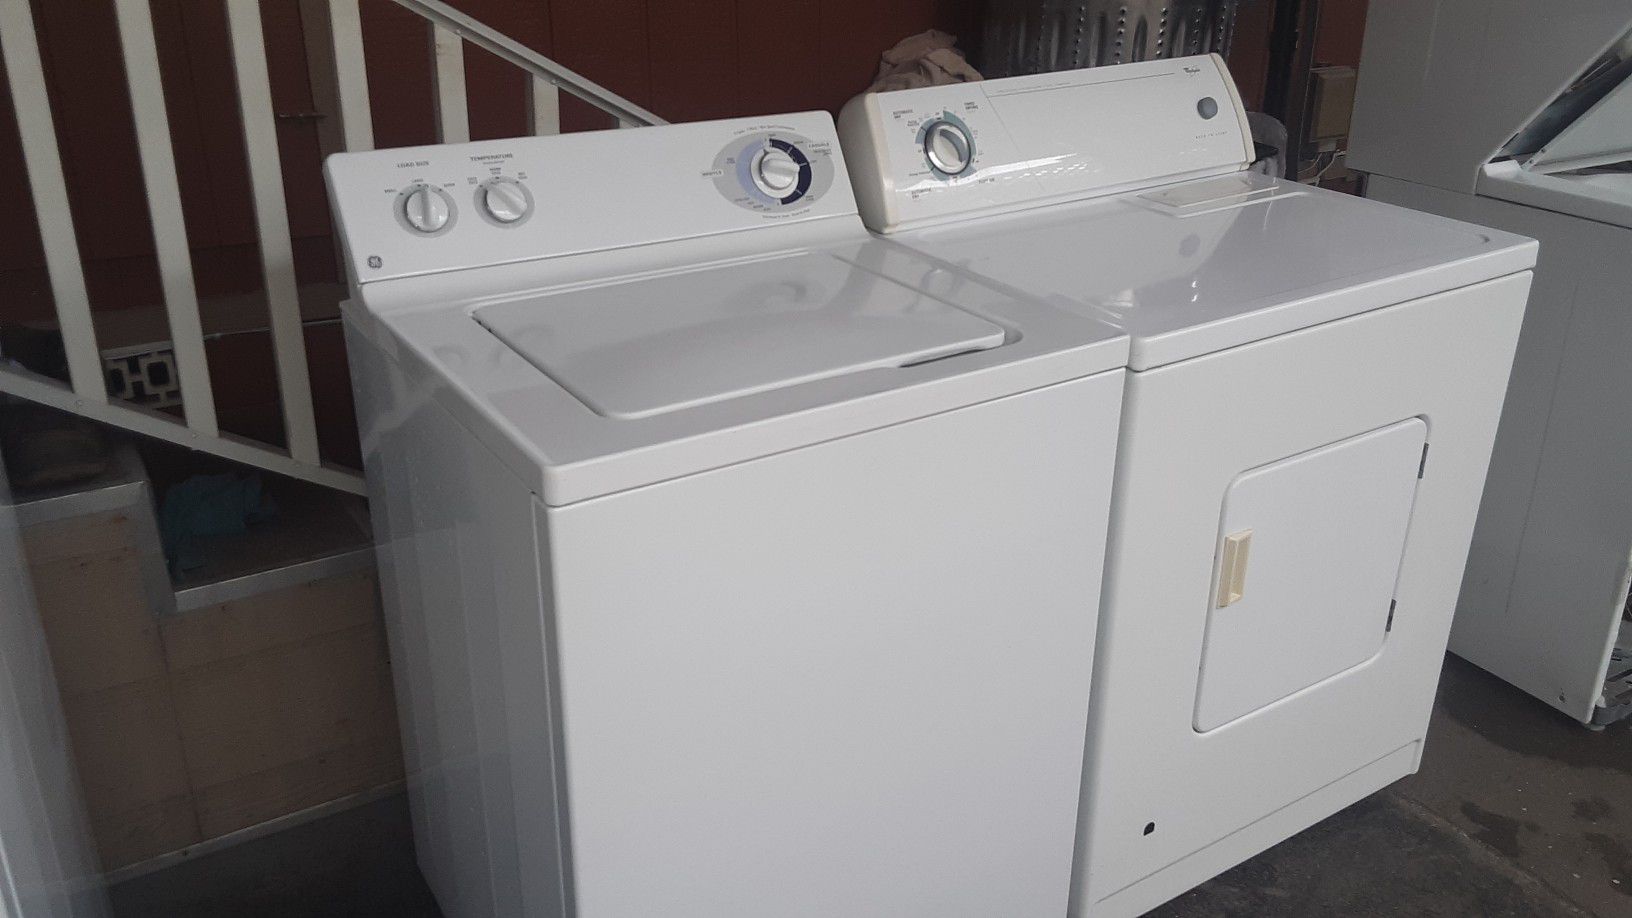 Washer and gas dryer super capacity plus!!